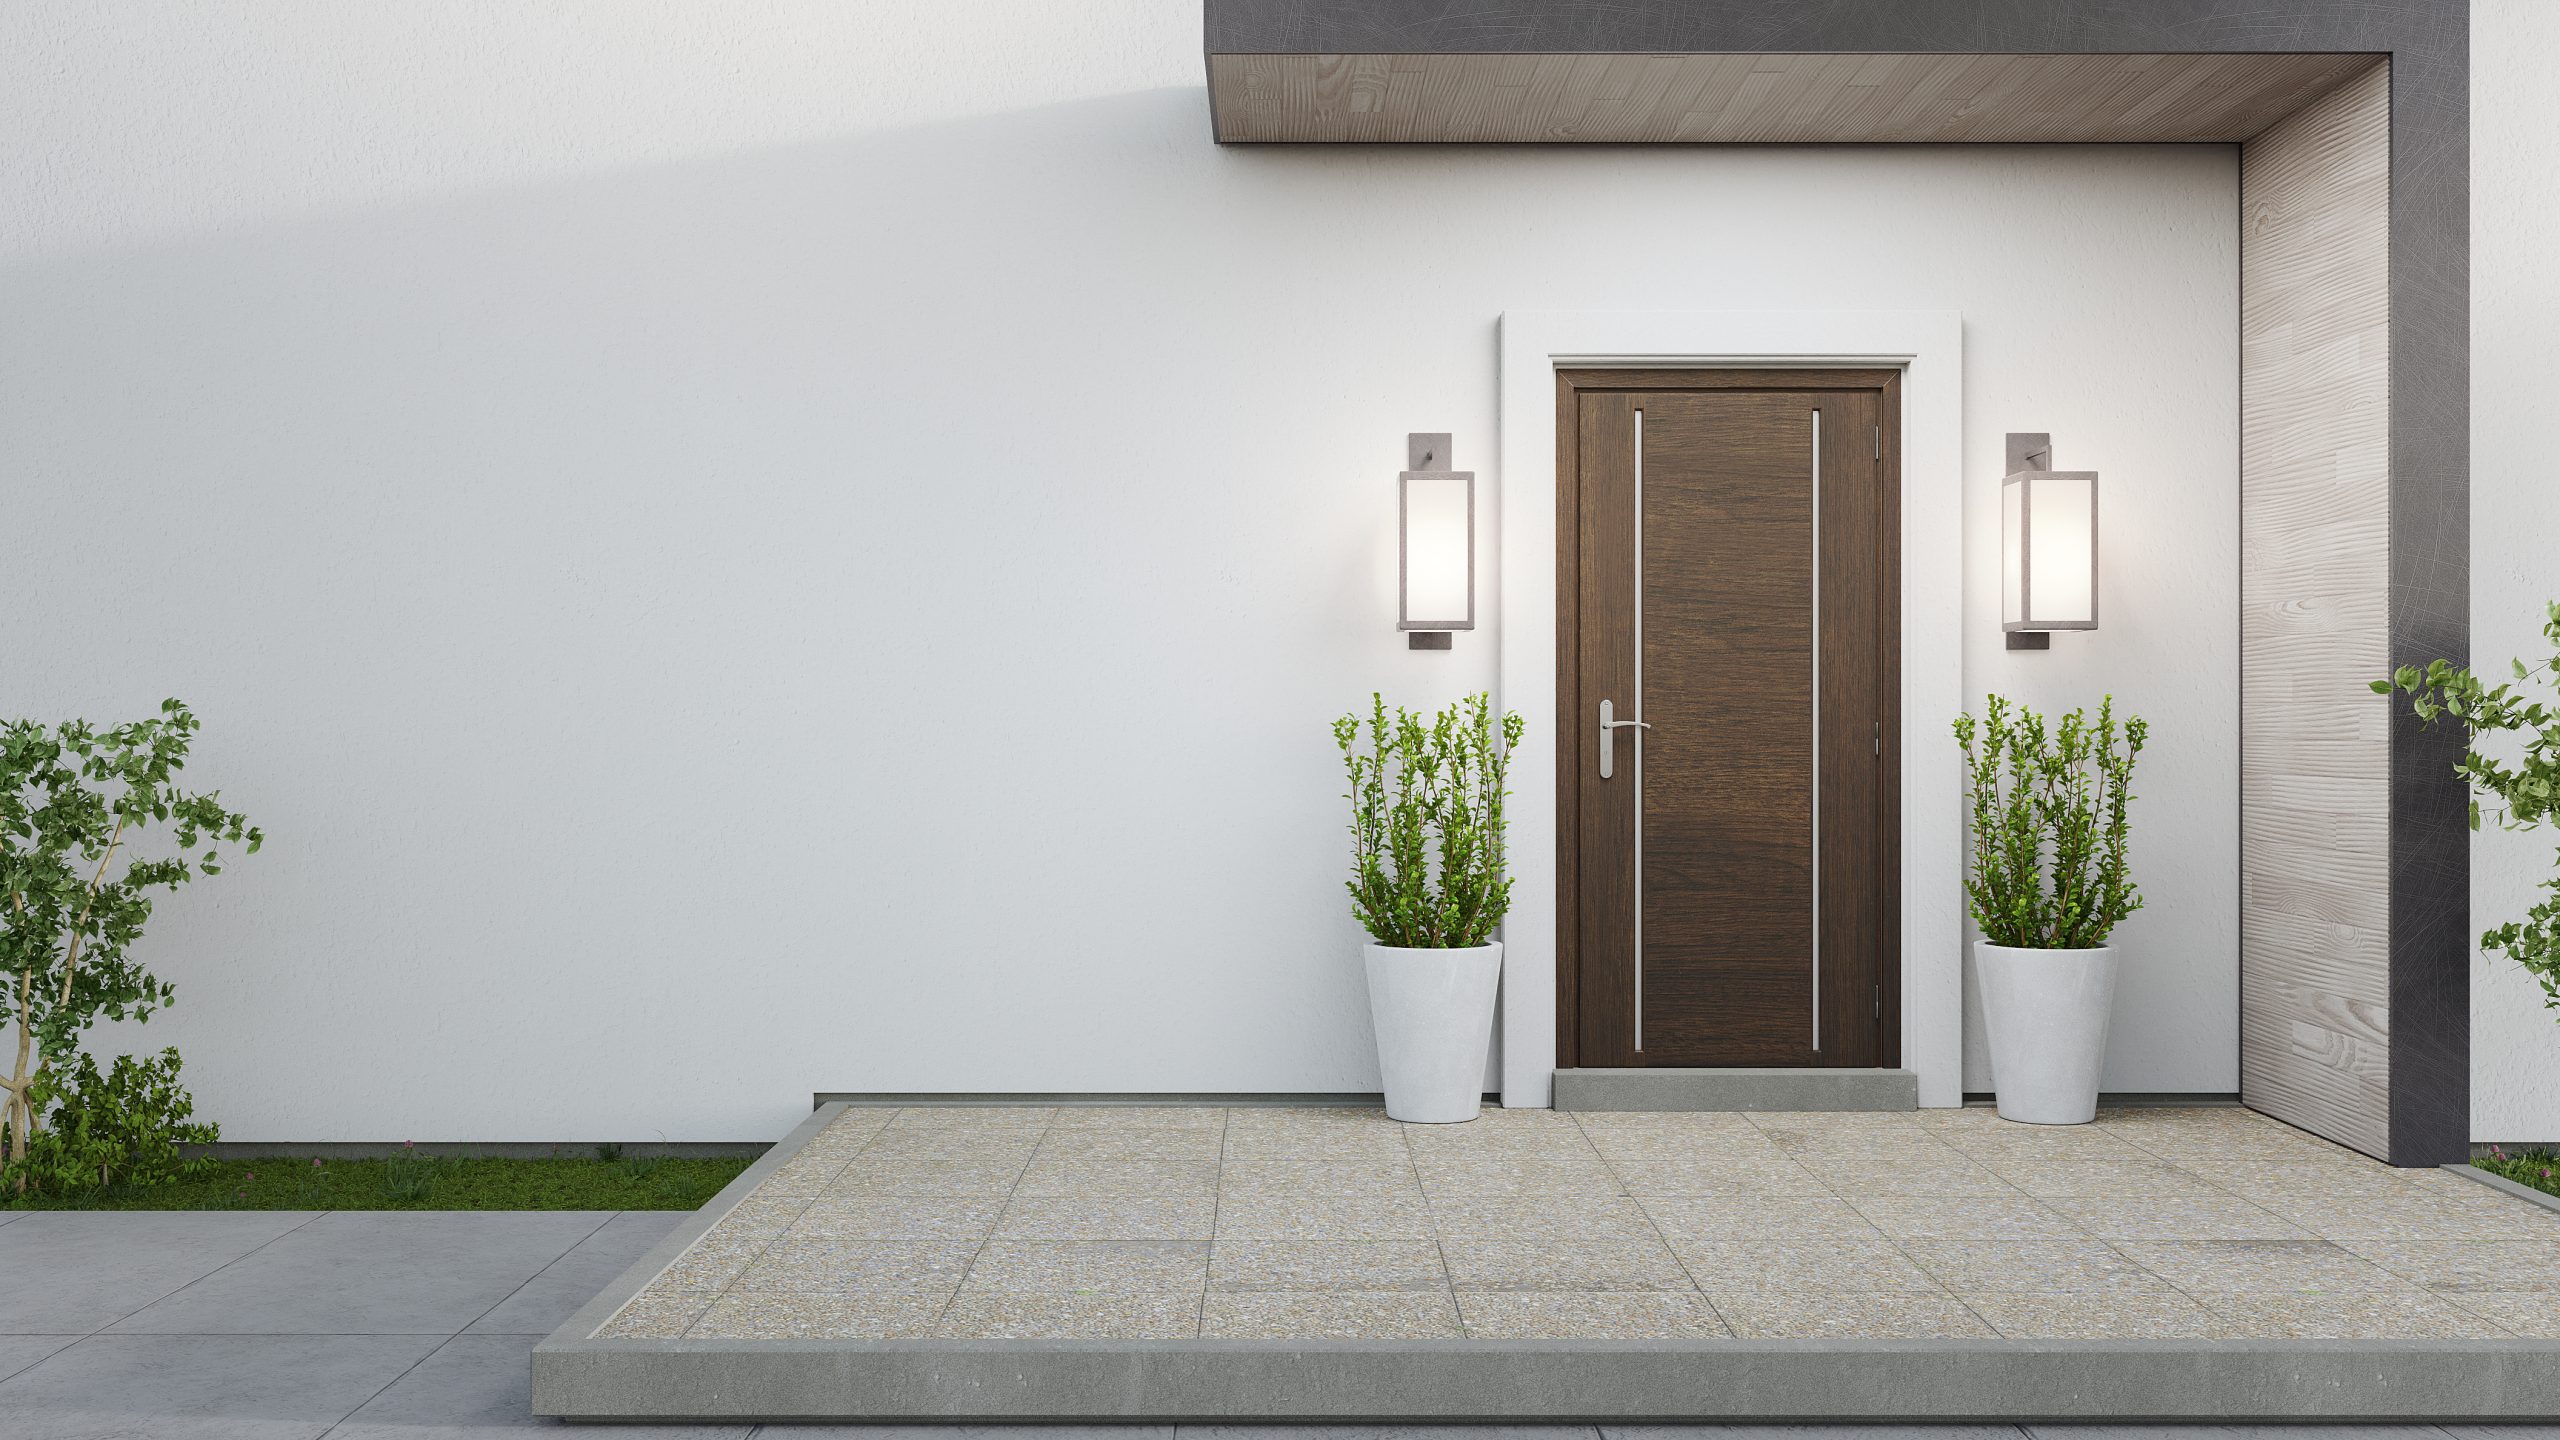 New house with wooden door and empty white wall. 3d rendering of